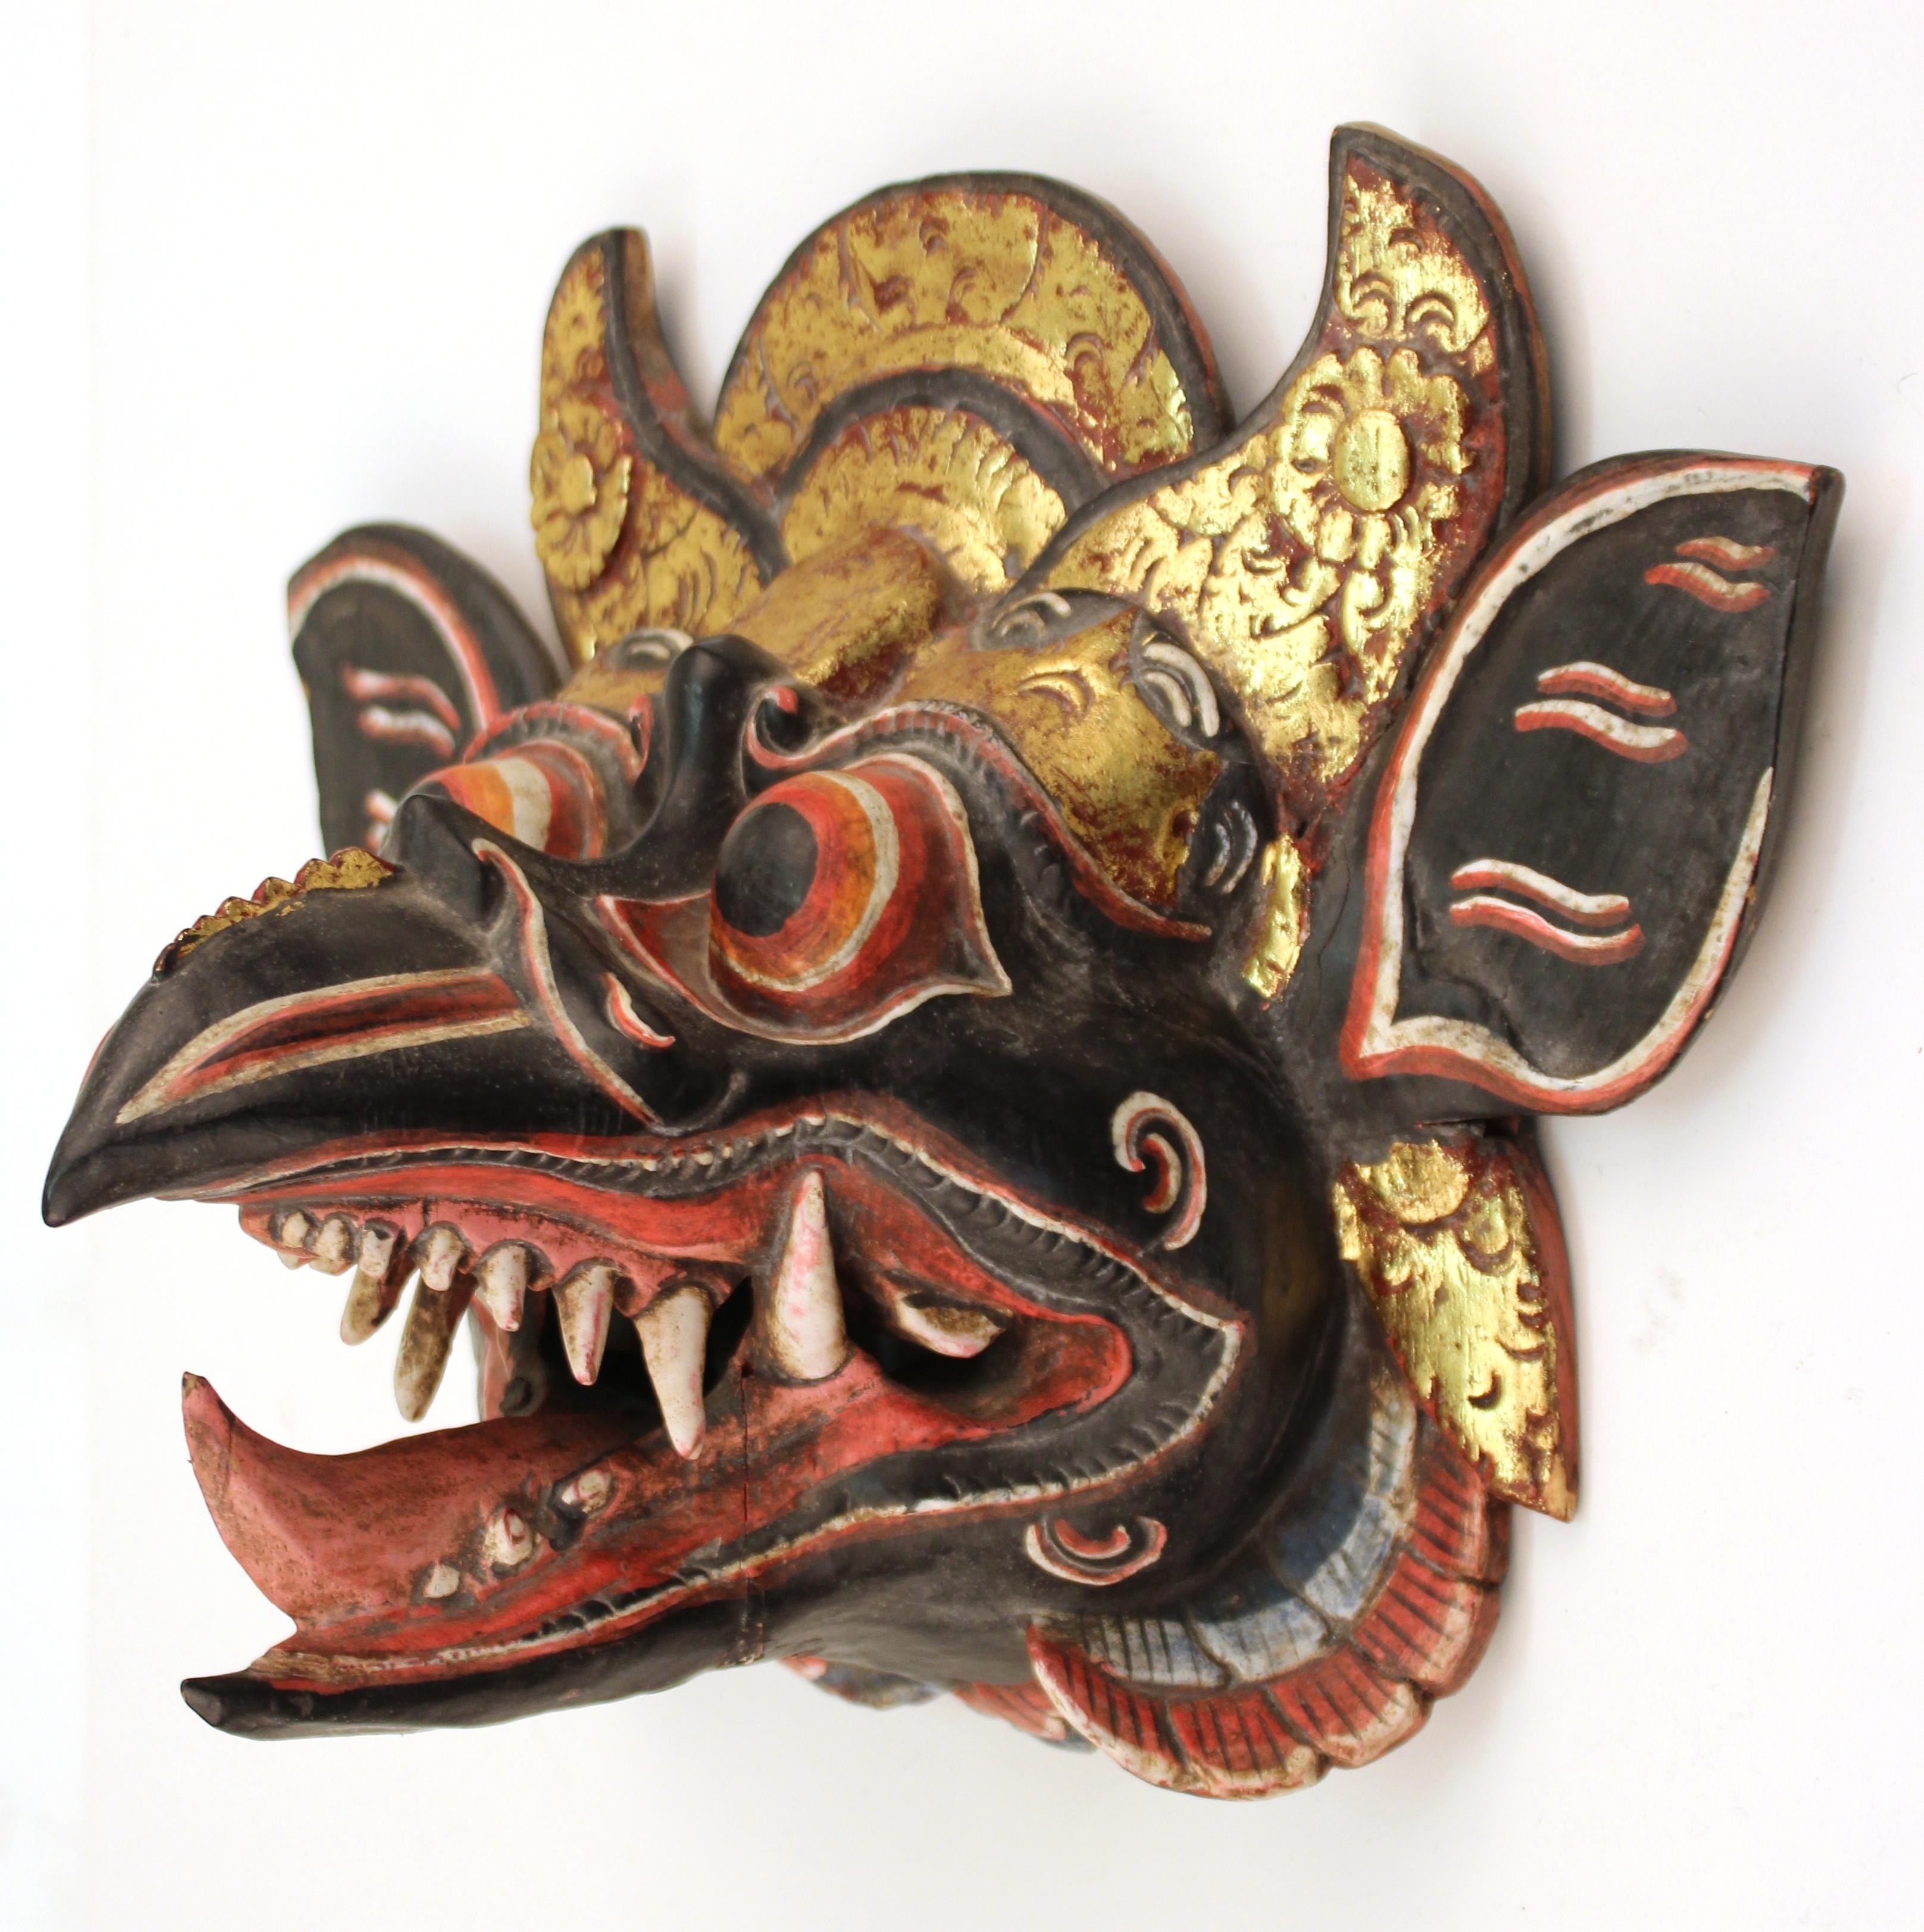 Balinese Barong dance mask of Garuda, the vehicle of Vishnu ornately hand carved and colorfully hand painted wood mask. The piece is in good vintage condition and was produced during the 20th century. Some age-appropriate wear.